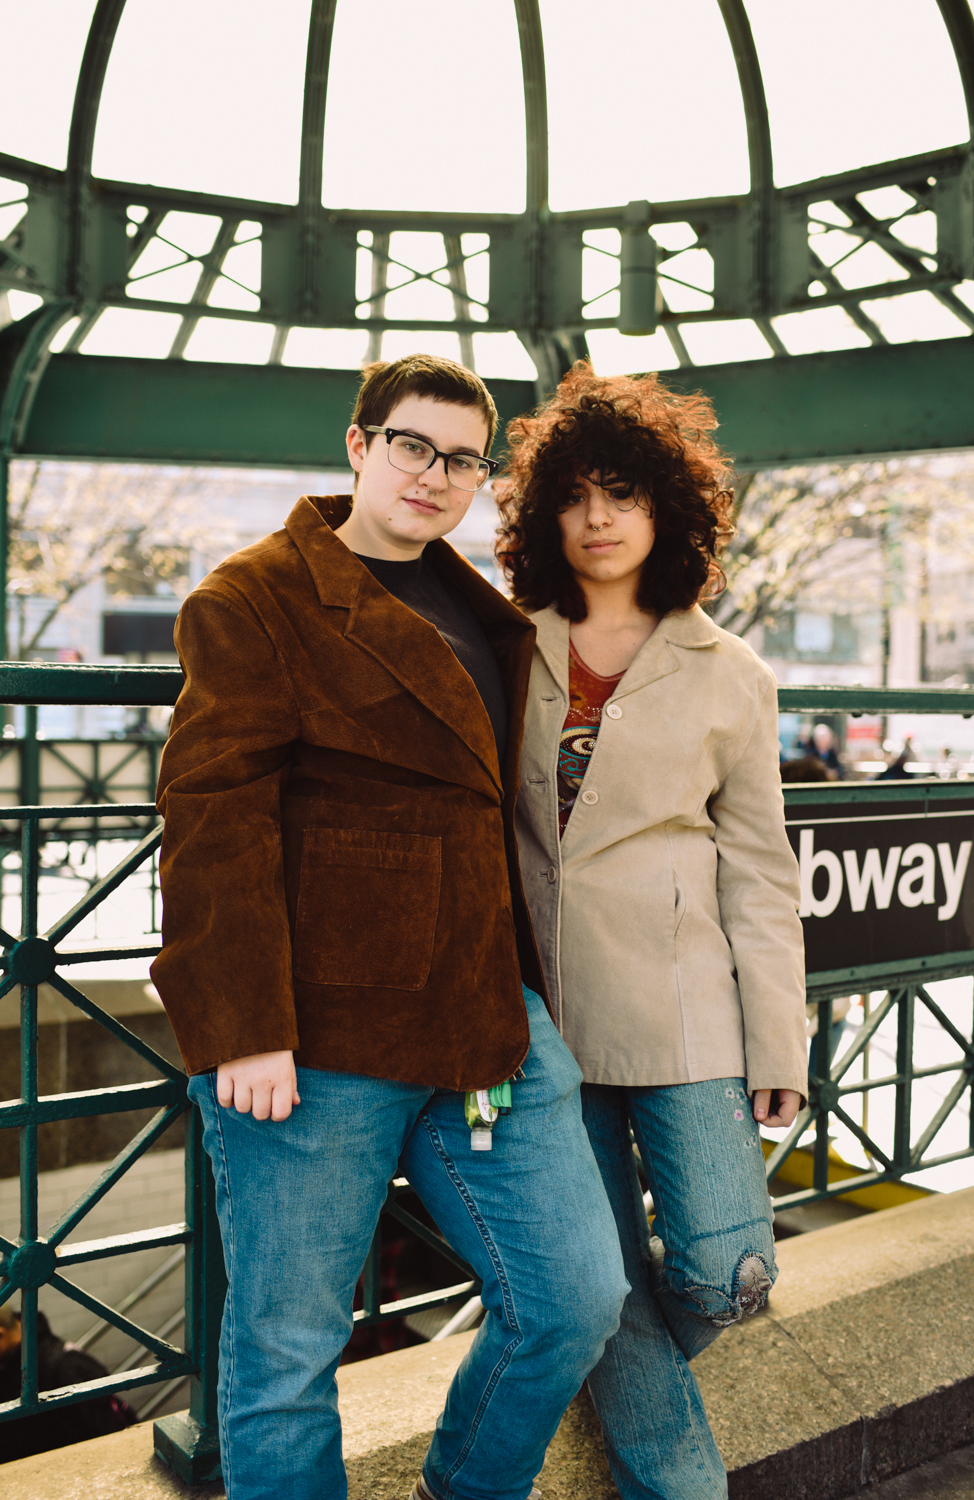 Raphael Williams and Shagg Solarz stand together in front of the subway station in Union Square Park. They face the camera.